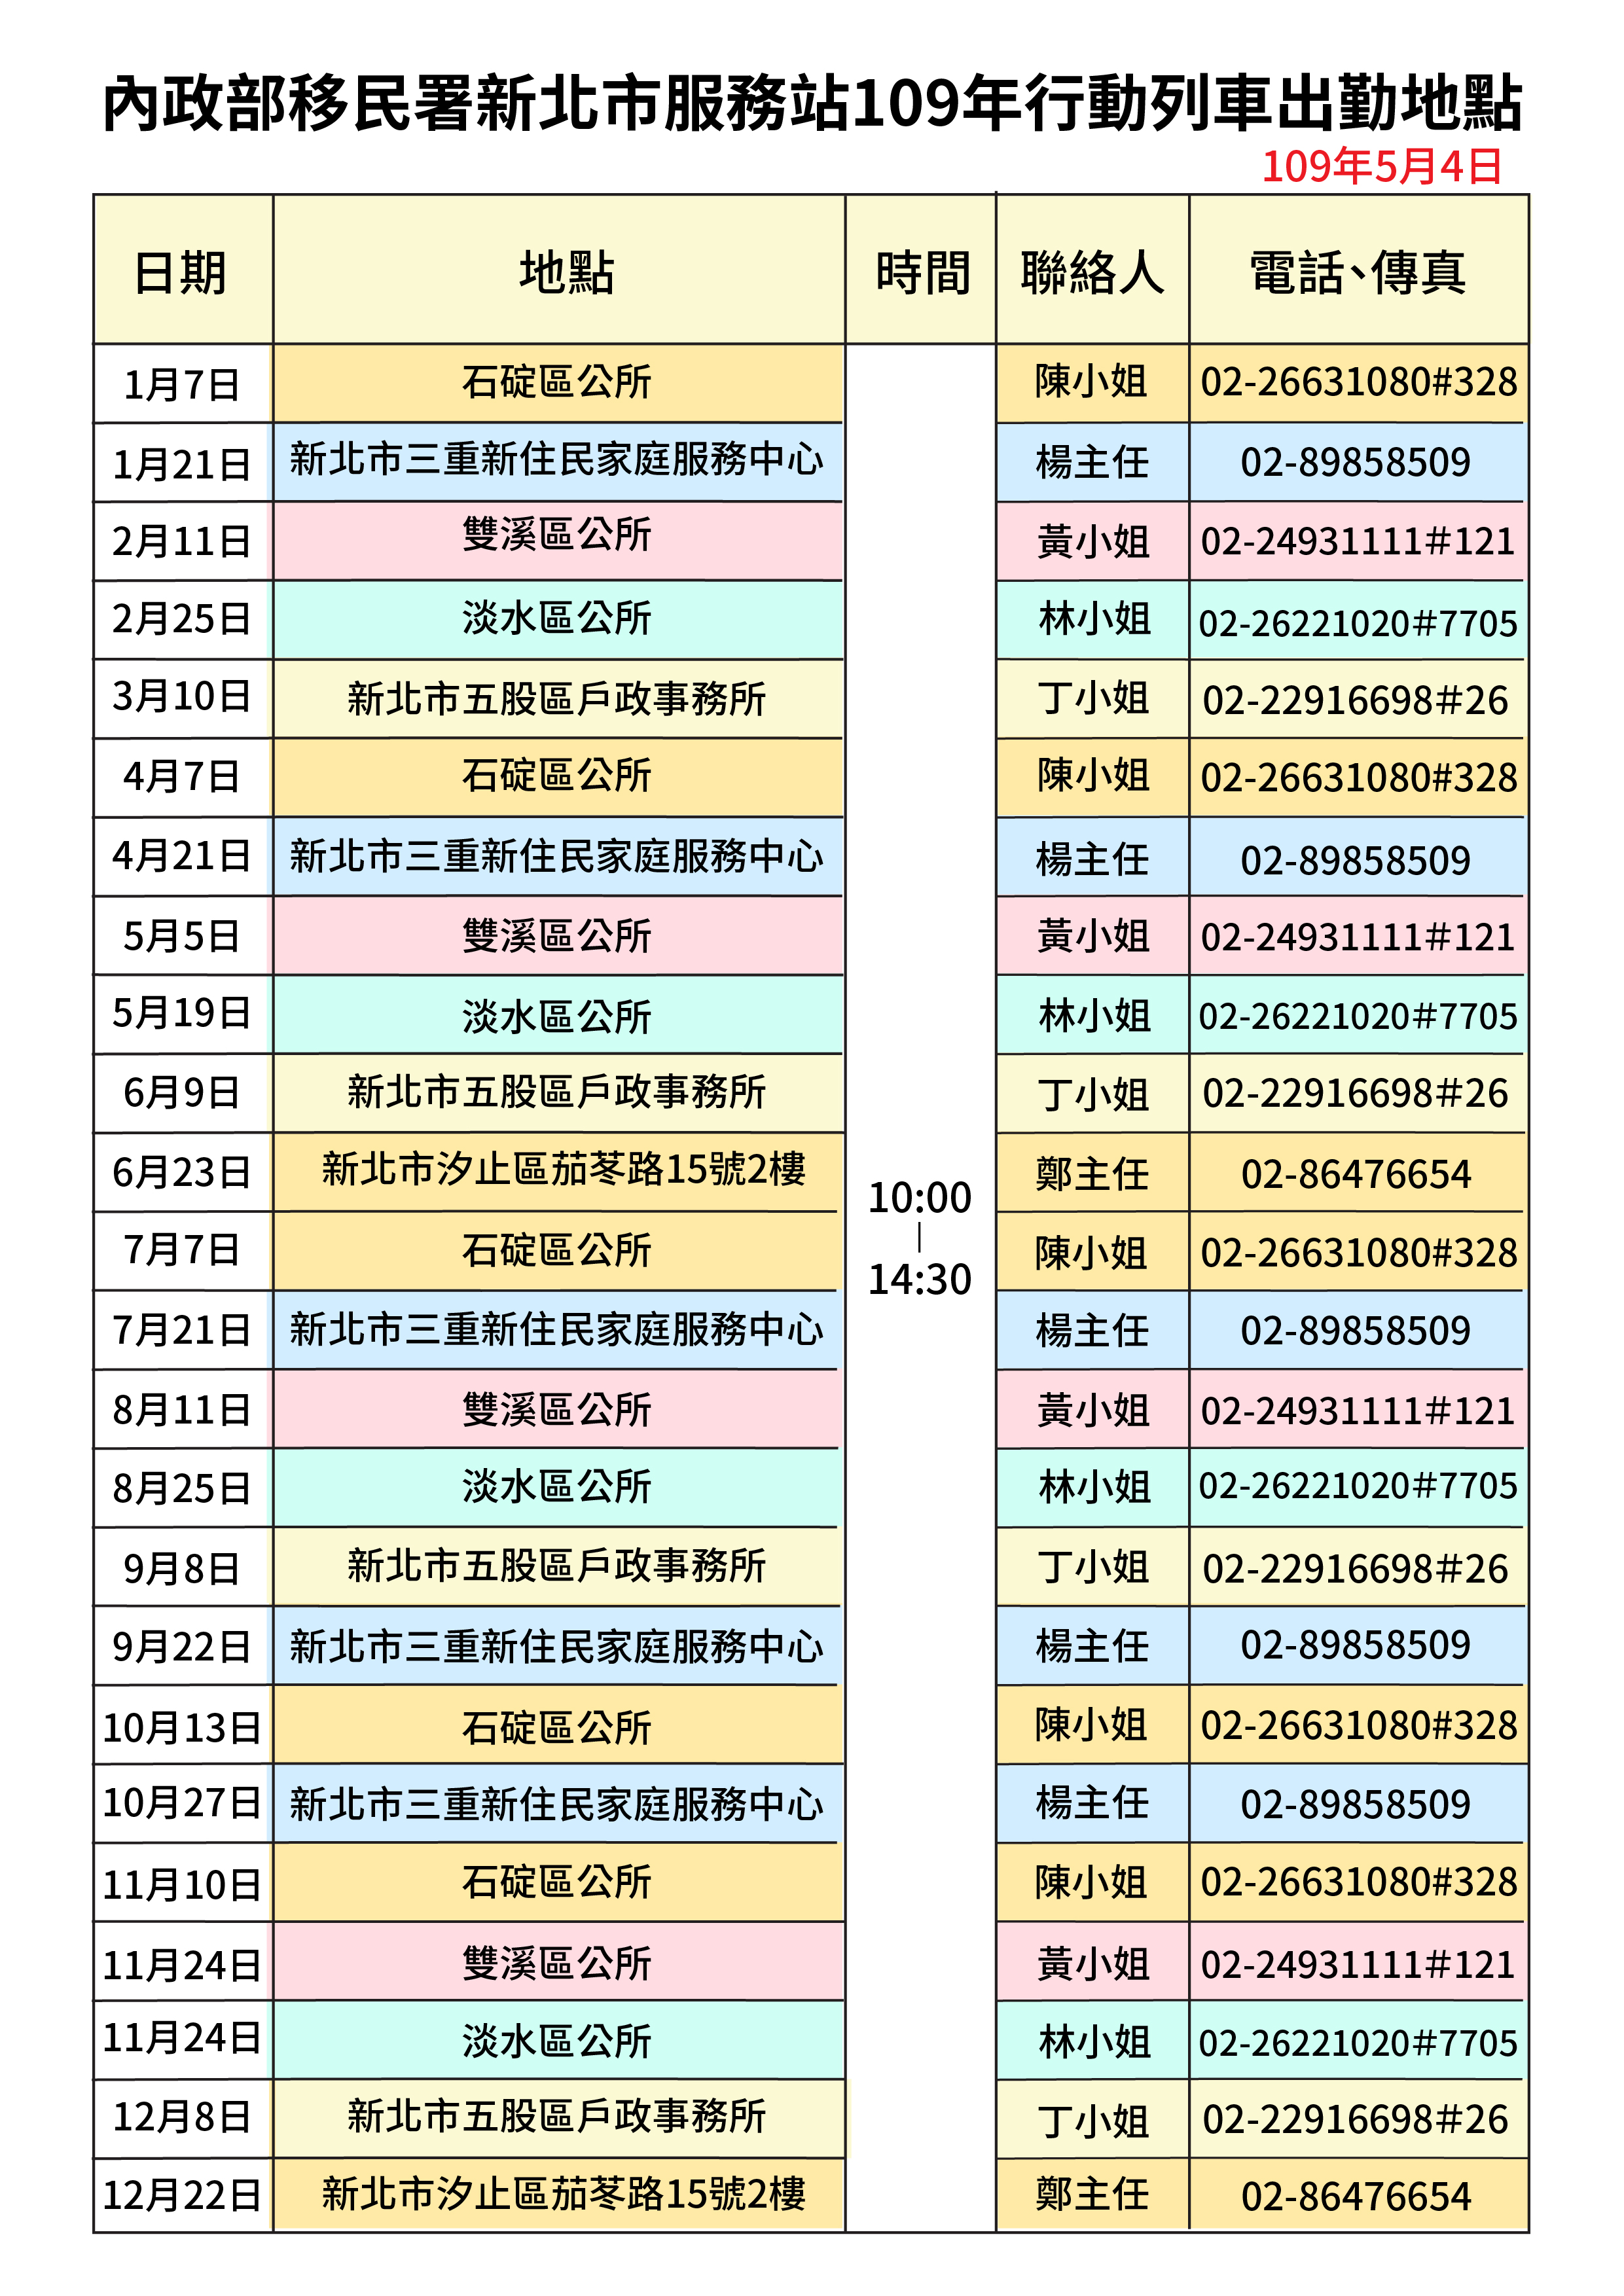 New Taipei Service Center of the NIA announced locations, date, and time of its mobile service car. 